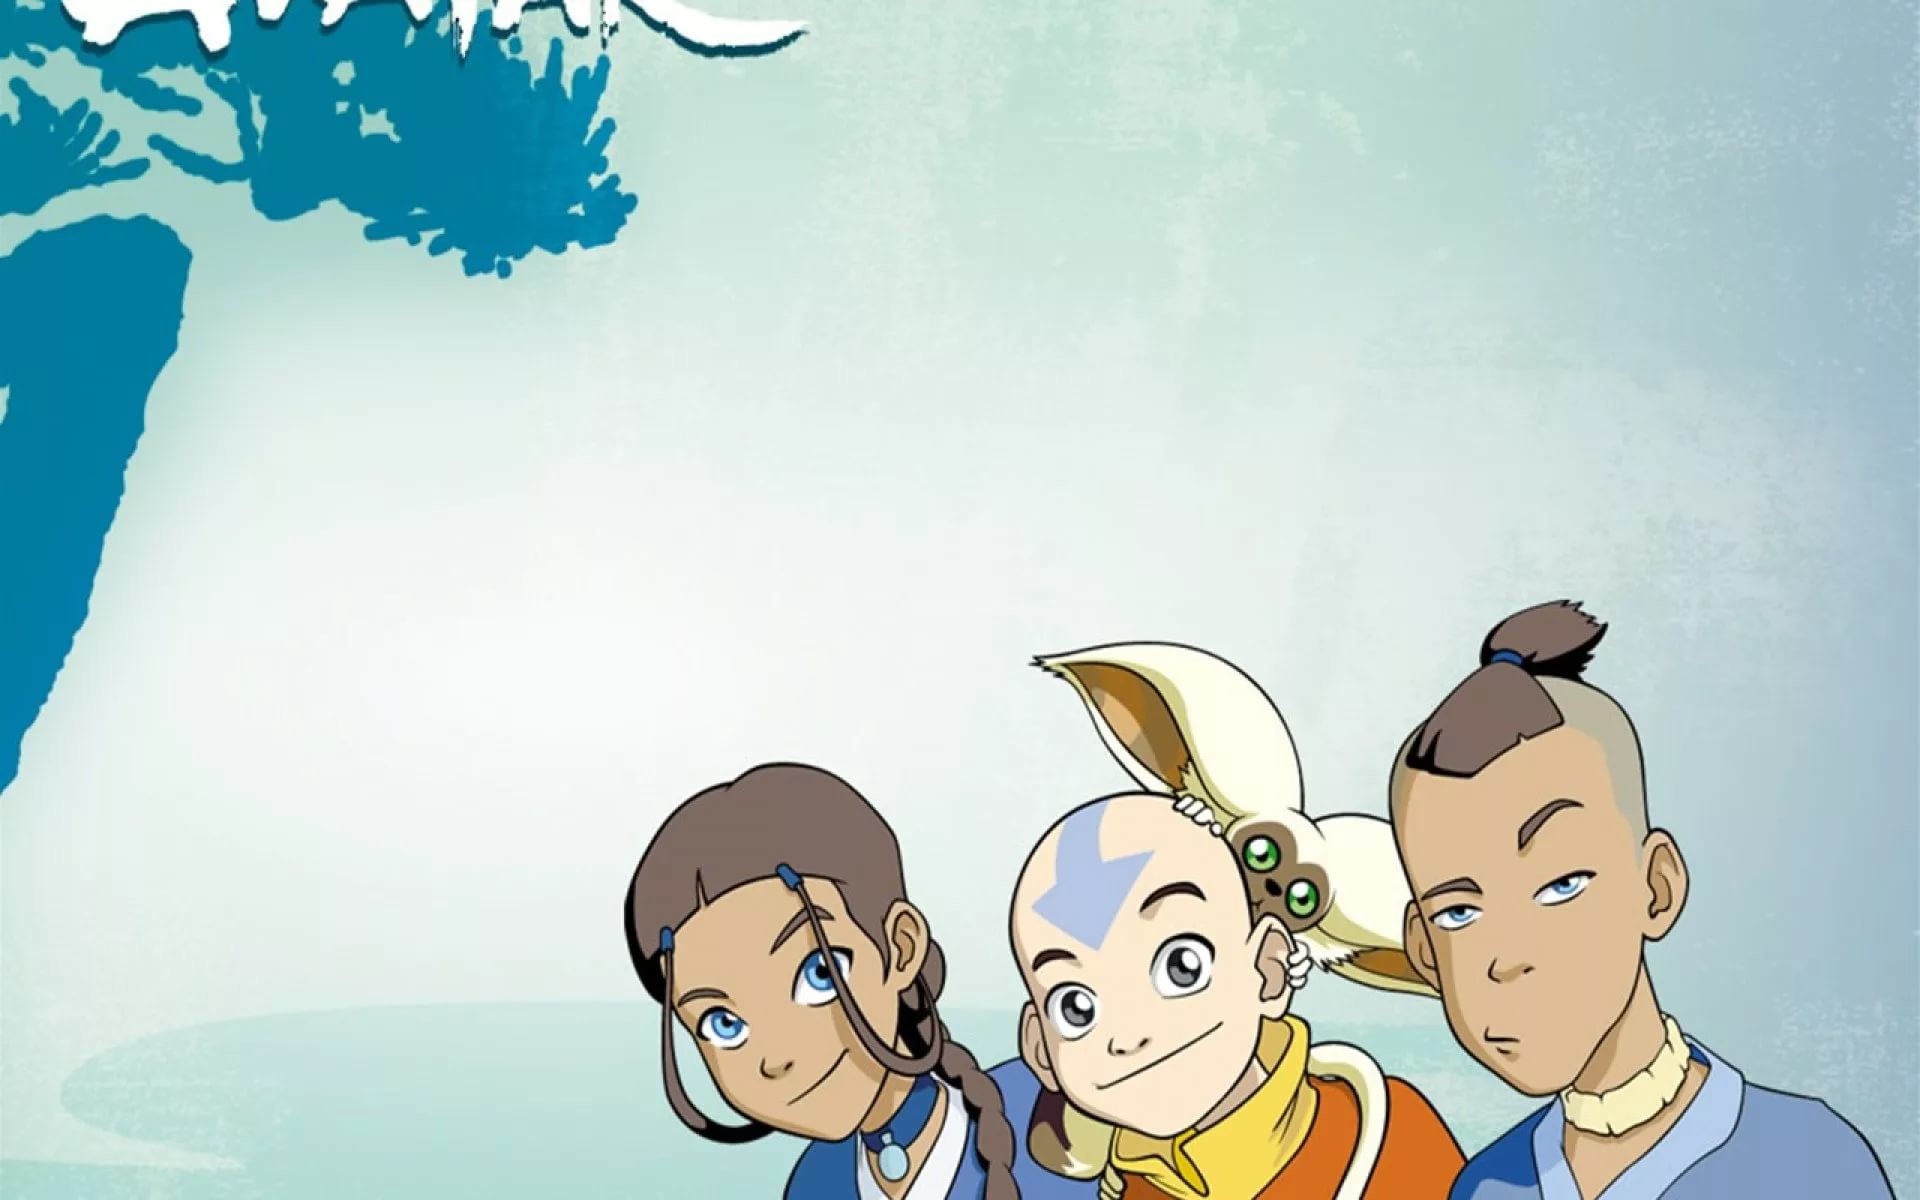 Avatar the last airbender download